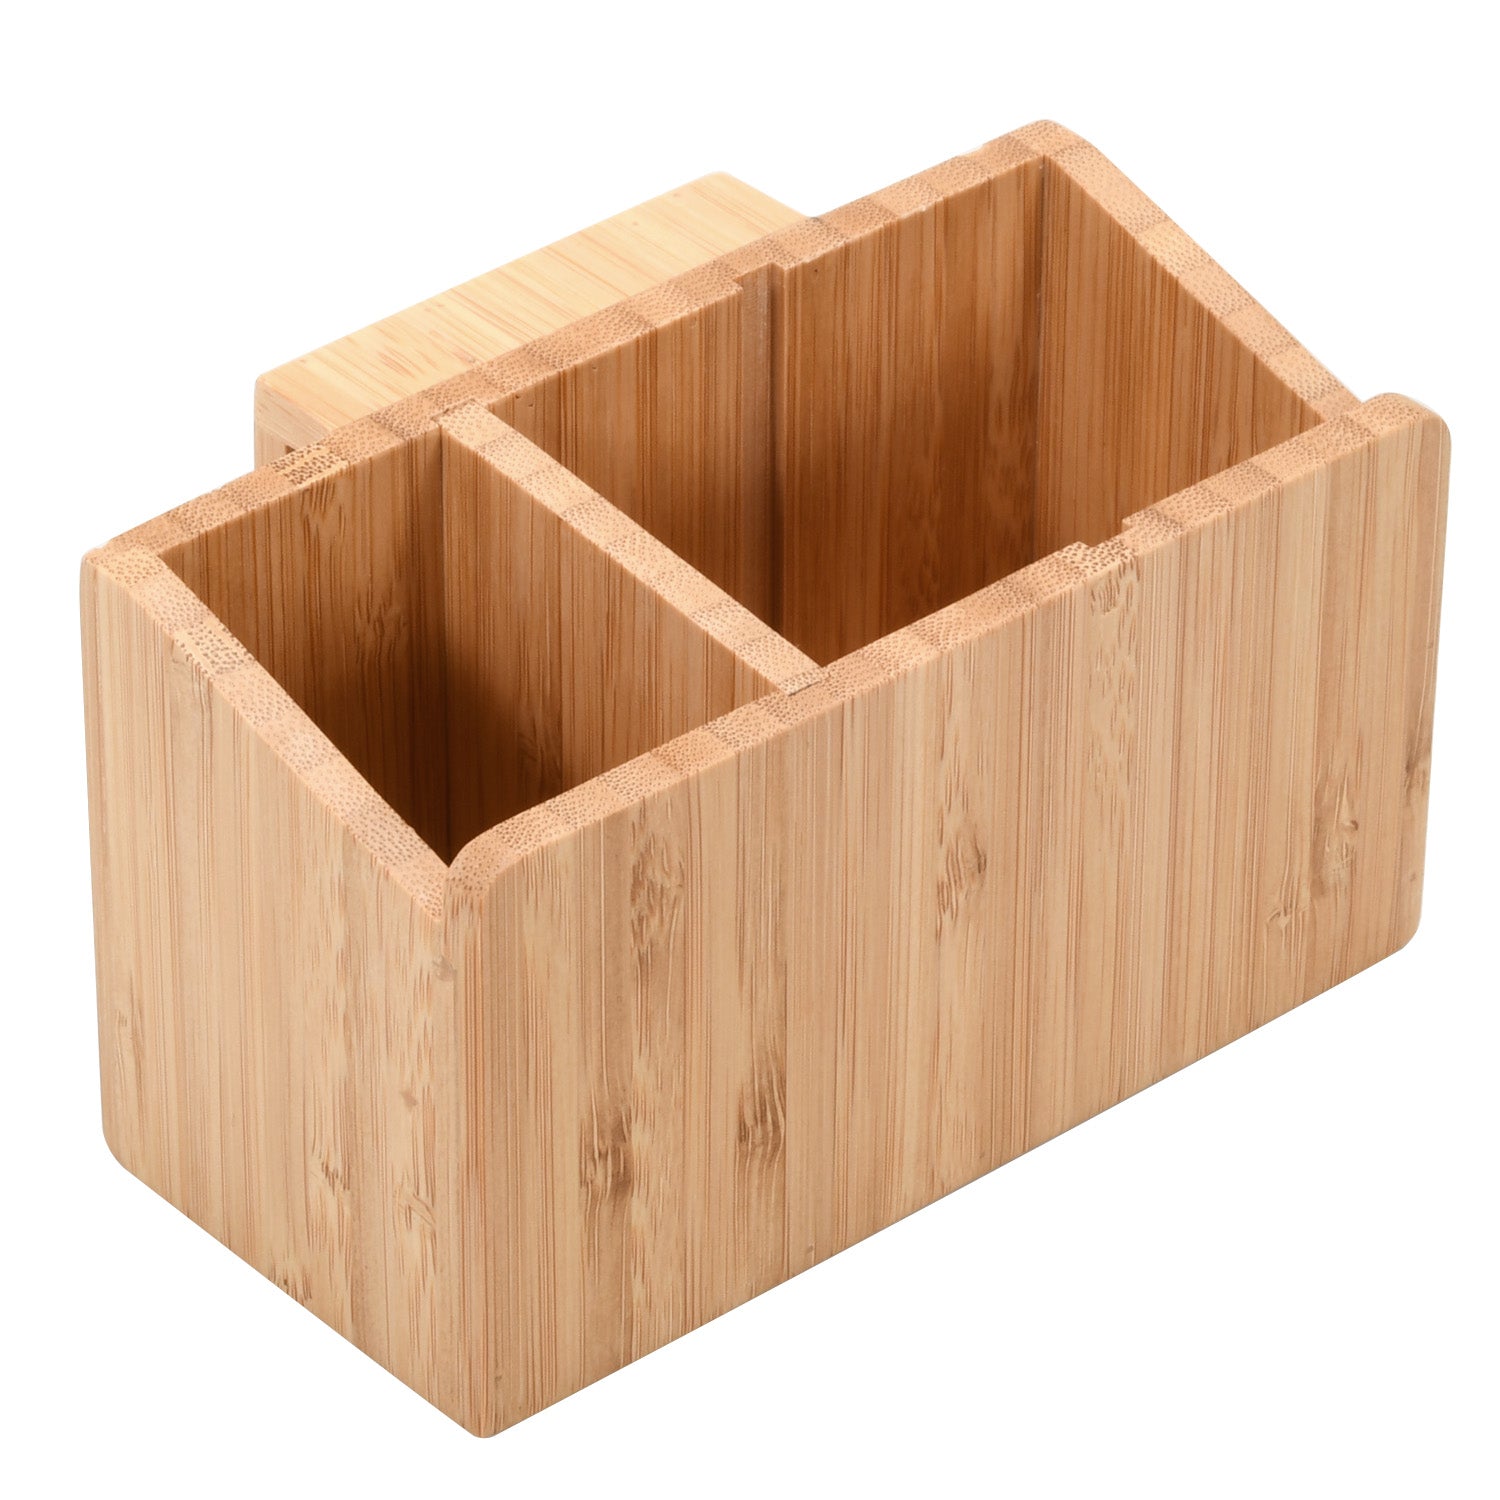 Bamboo Caddy Add - On for Charging Stations and Office Organizers